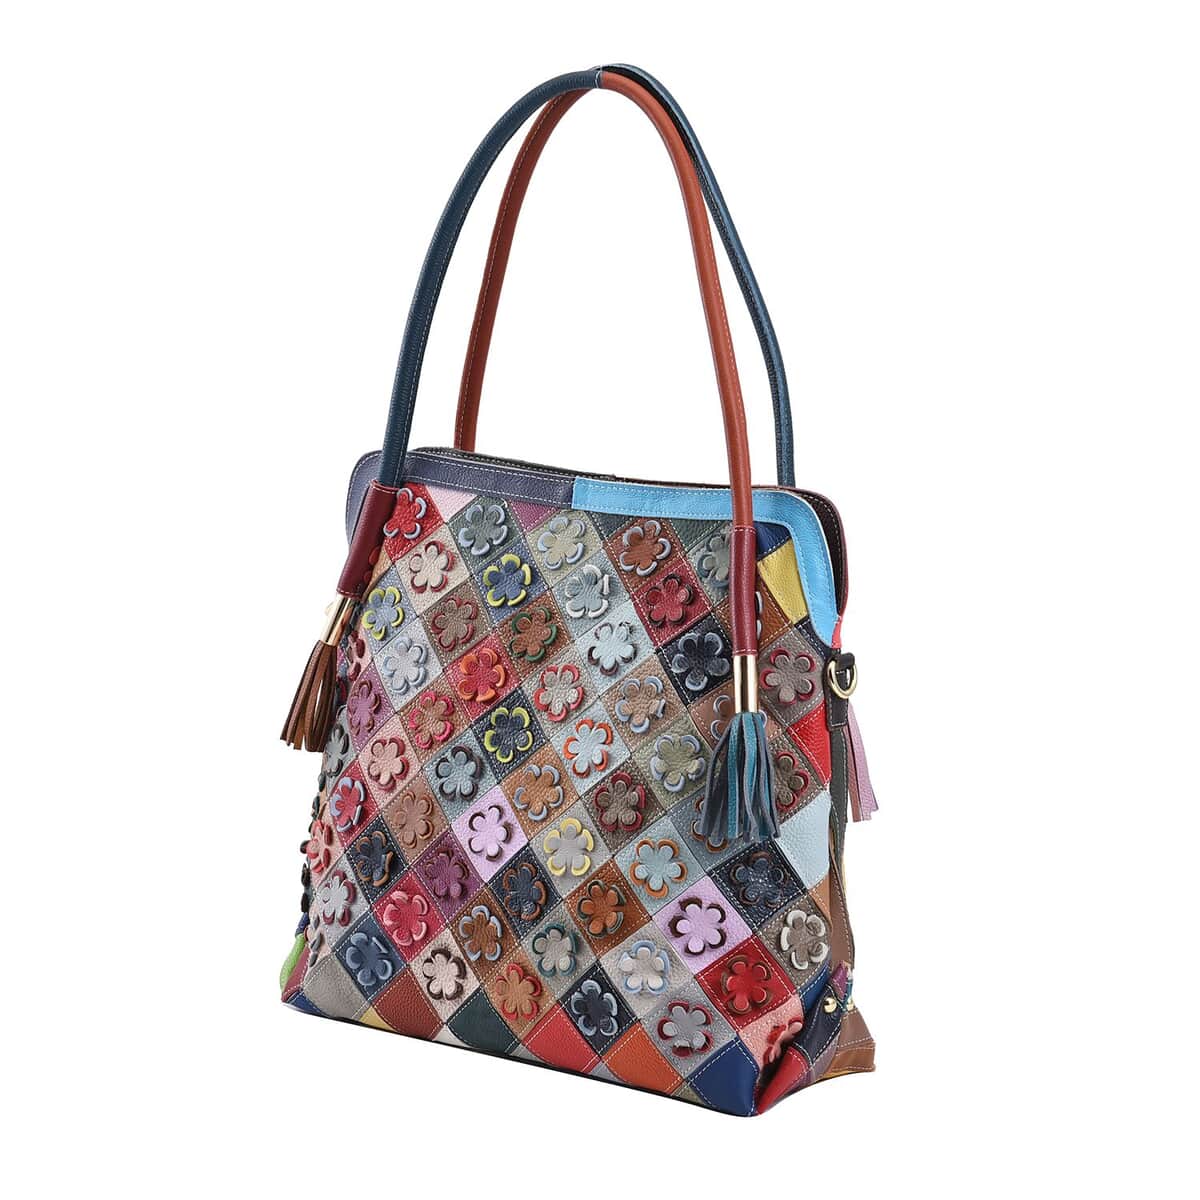 Rainbow Color Stripe and 3D Flower Pattern Genuine Leather Tote Bag (16.53"x6.5"x13.78") with Long Strap image number 6